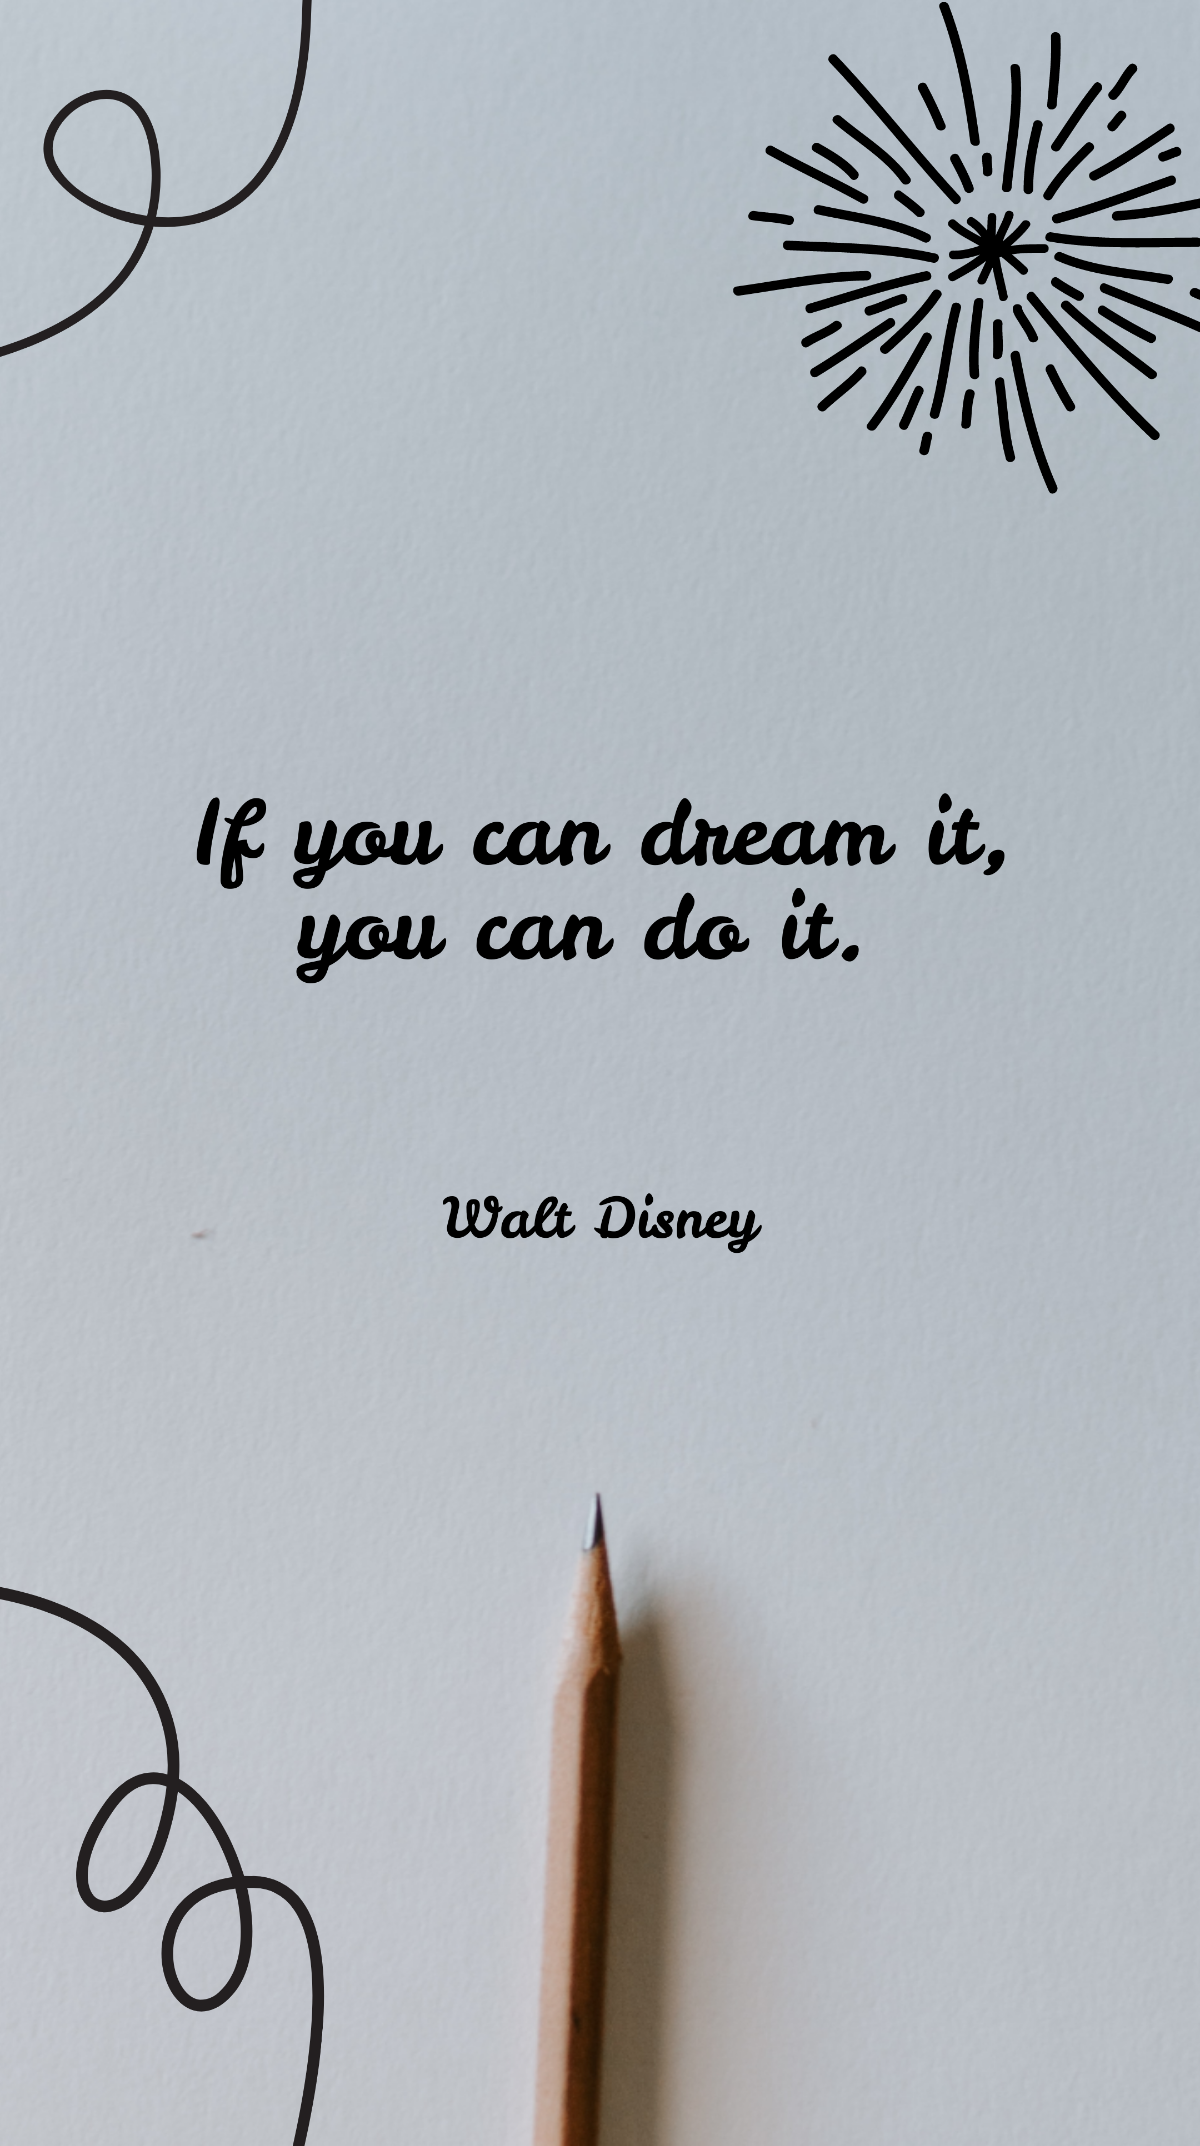 Walt Disney - If you can dream it, you can do it. Template